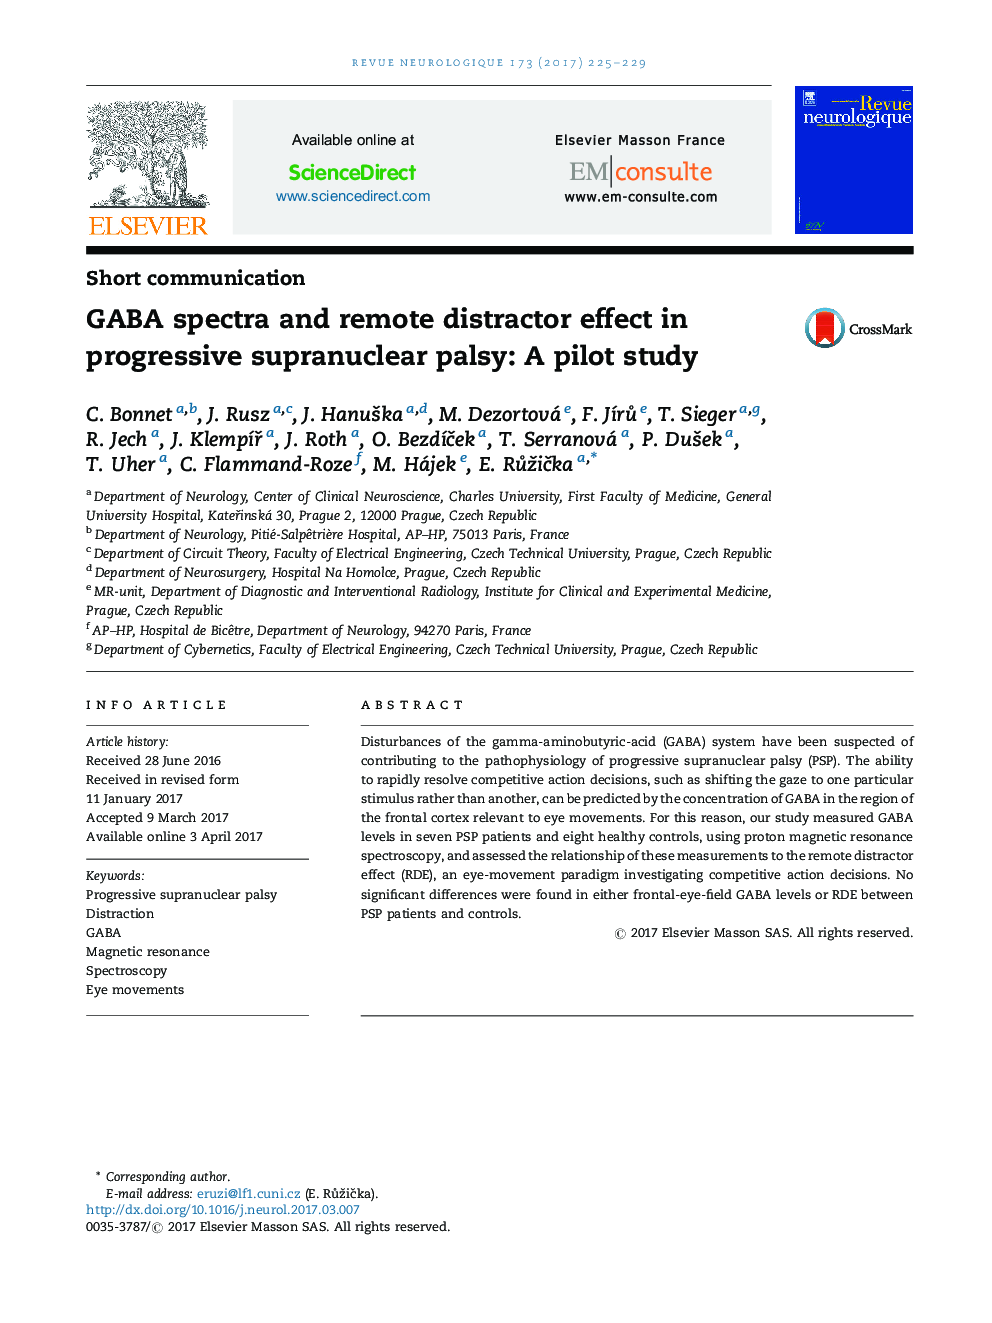 Short communicationGABA spectra and remote distractor effect in progressive supranuclear palsy: A pilot study